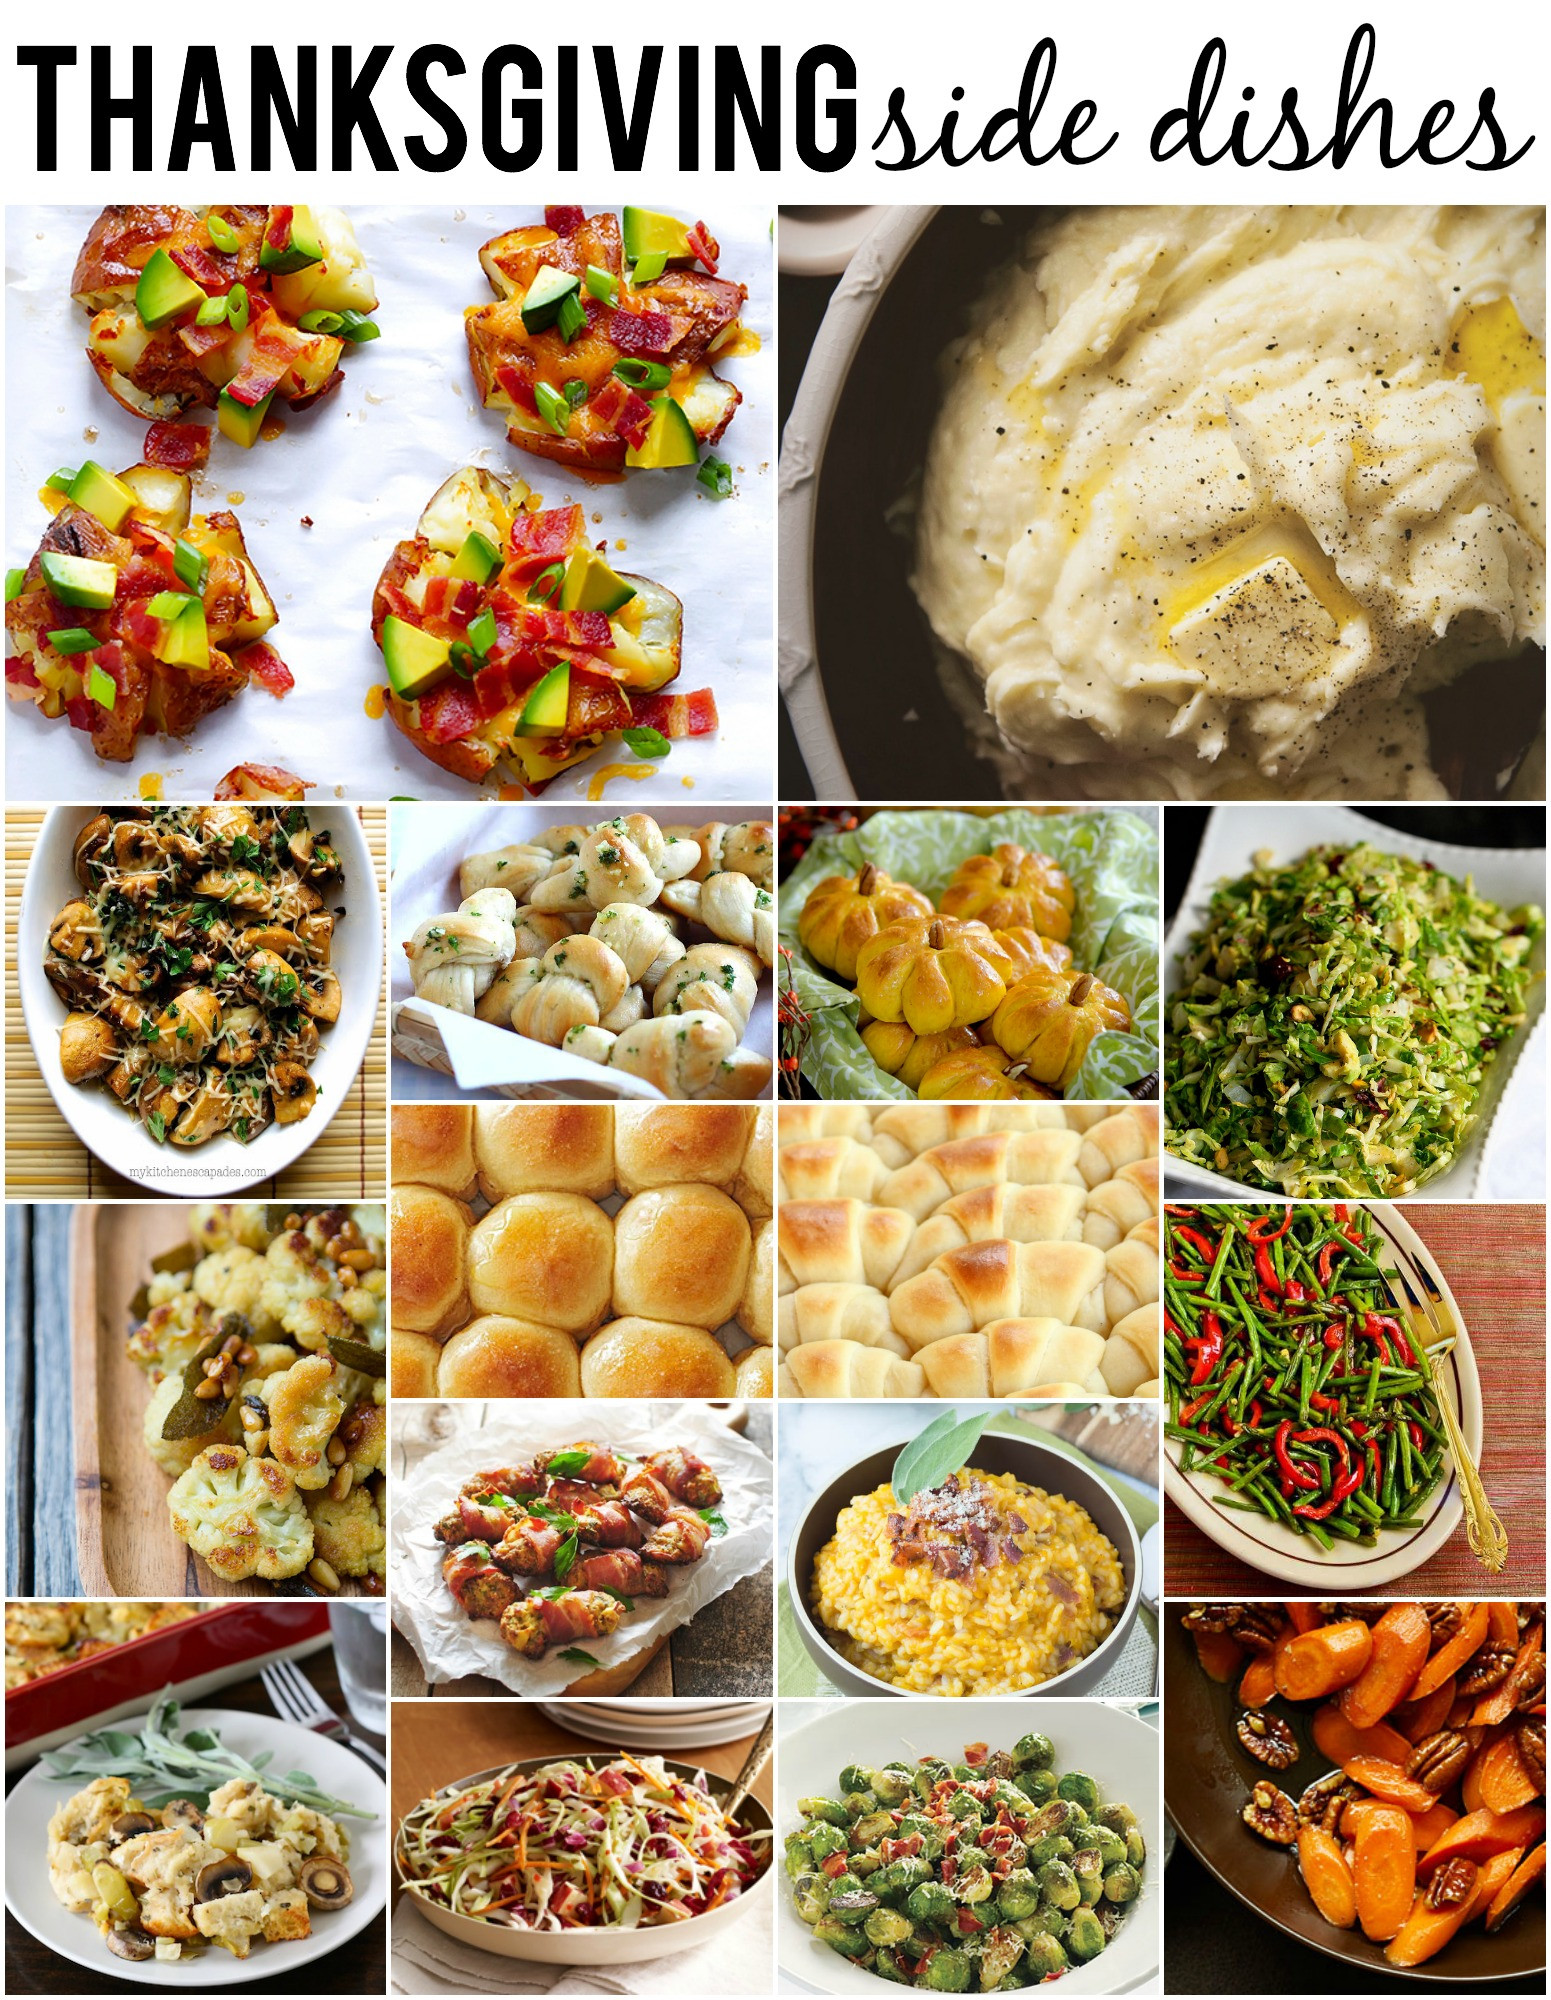 35 Ideas for Turkey Dinner Sides - Best Recipes Ideas and Collections